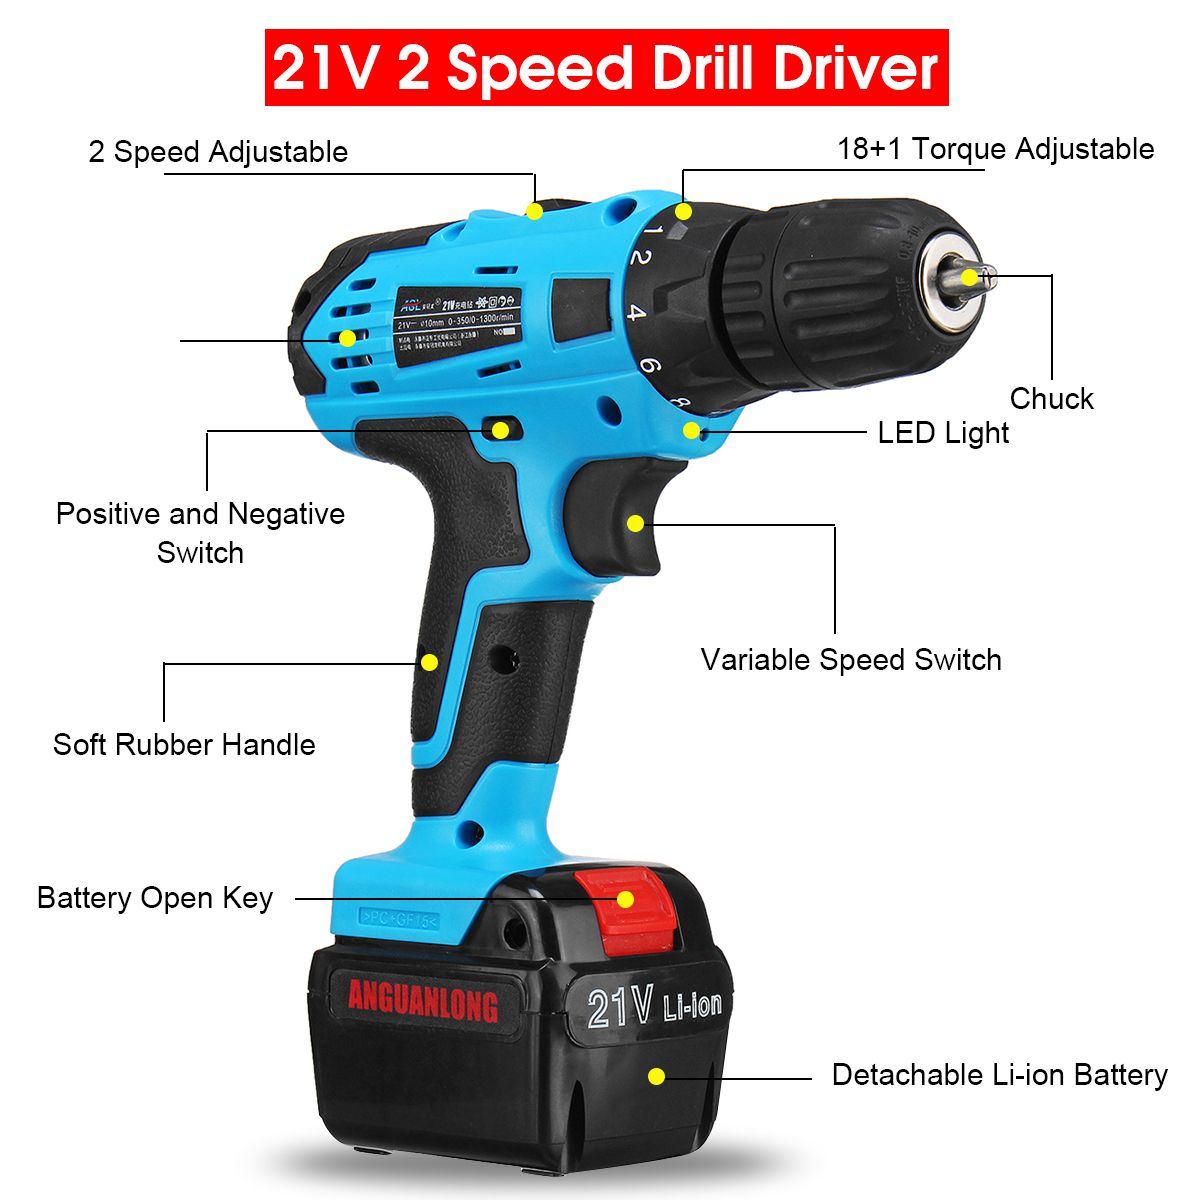 DROW-12V21V-Electric-Cordless-Hand-Drill-Kit-151181-Torque-Household-Electric-Screwdriver-Driver-Too-1430177